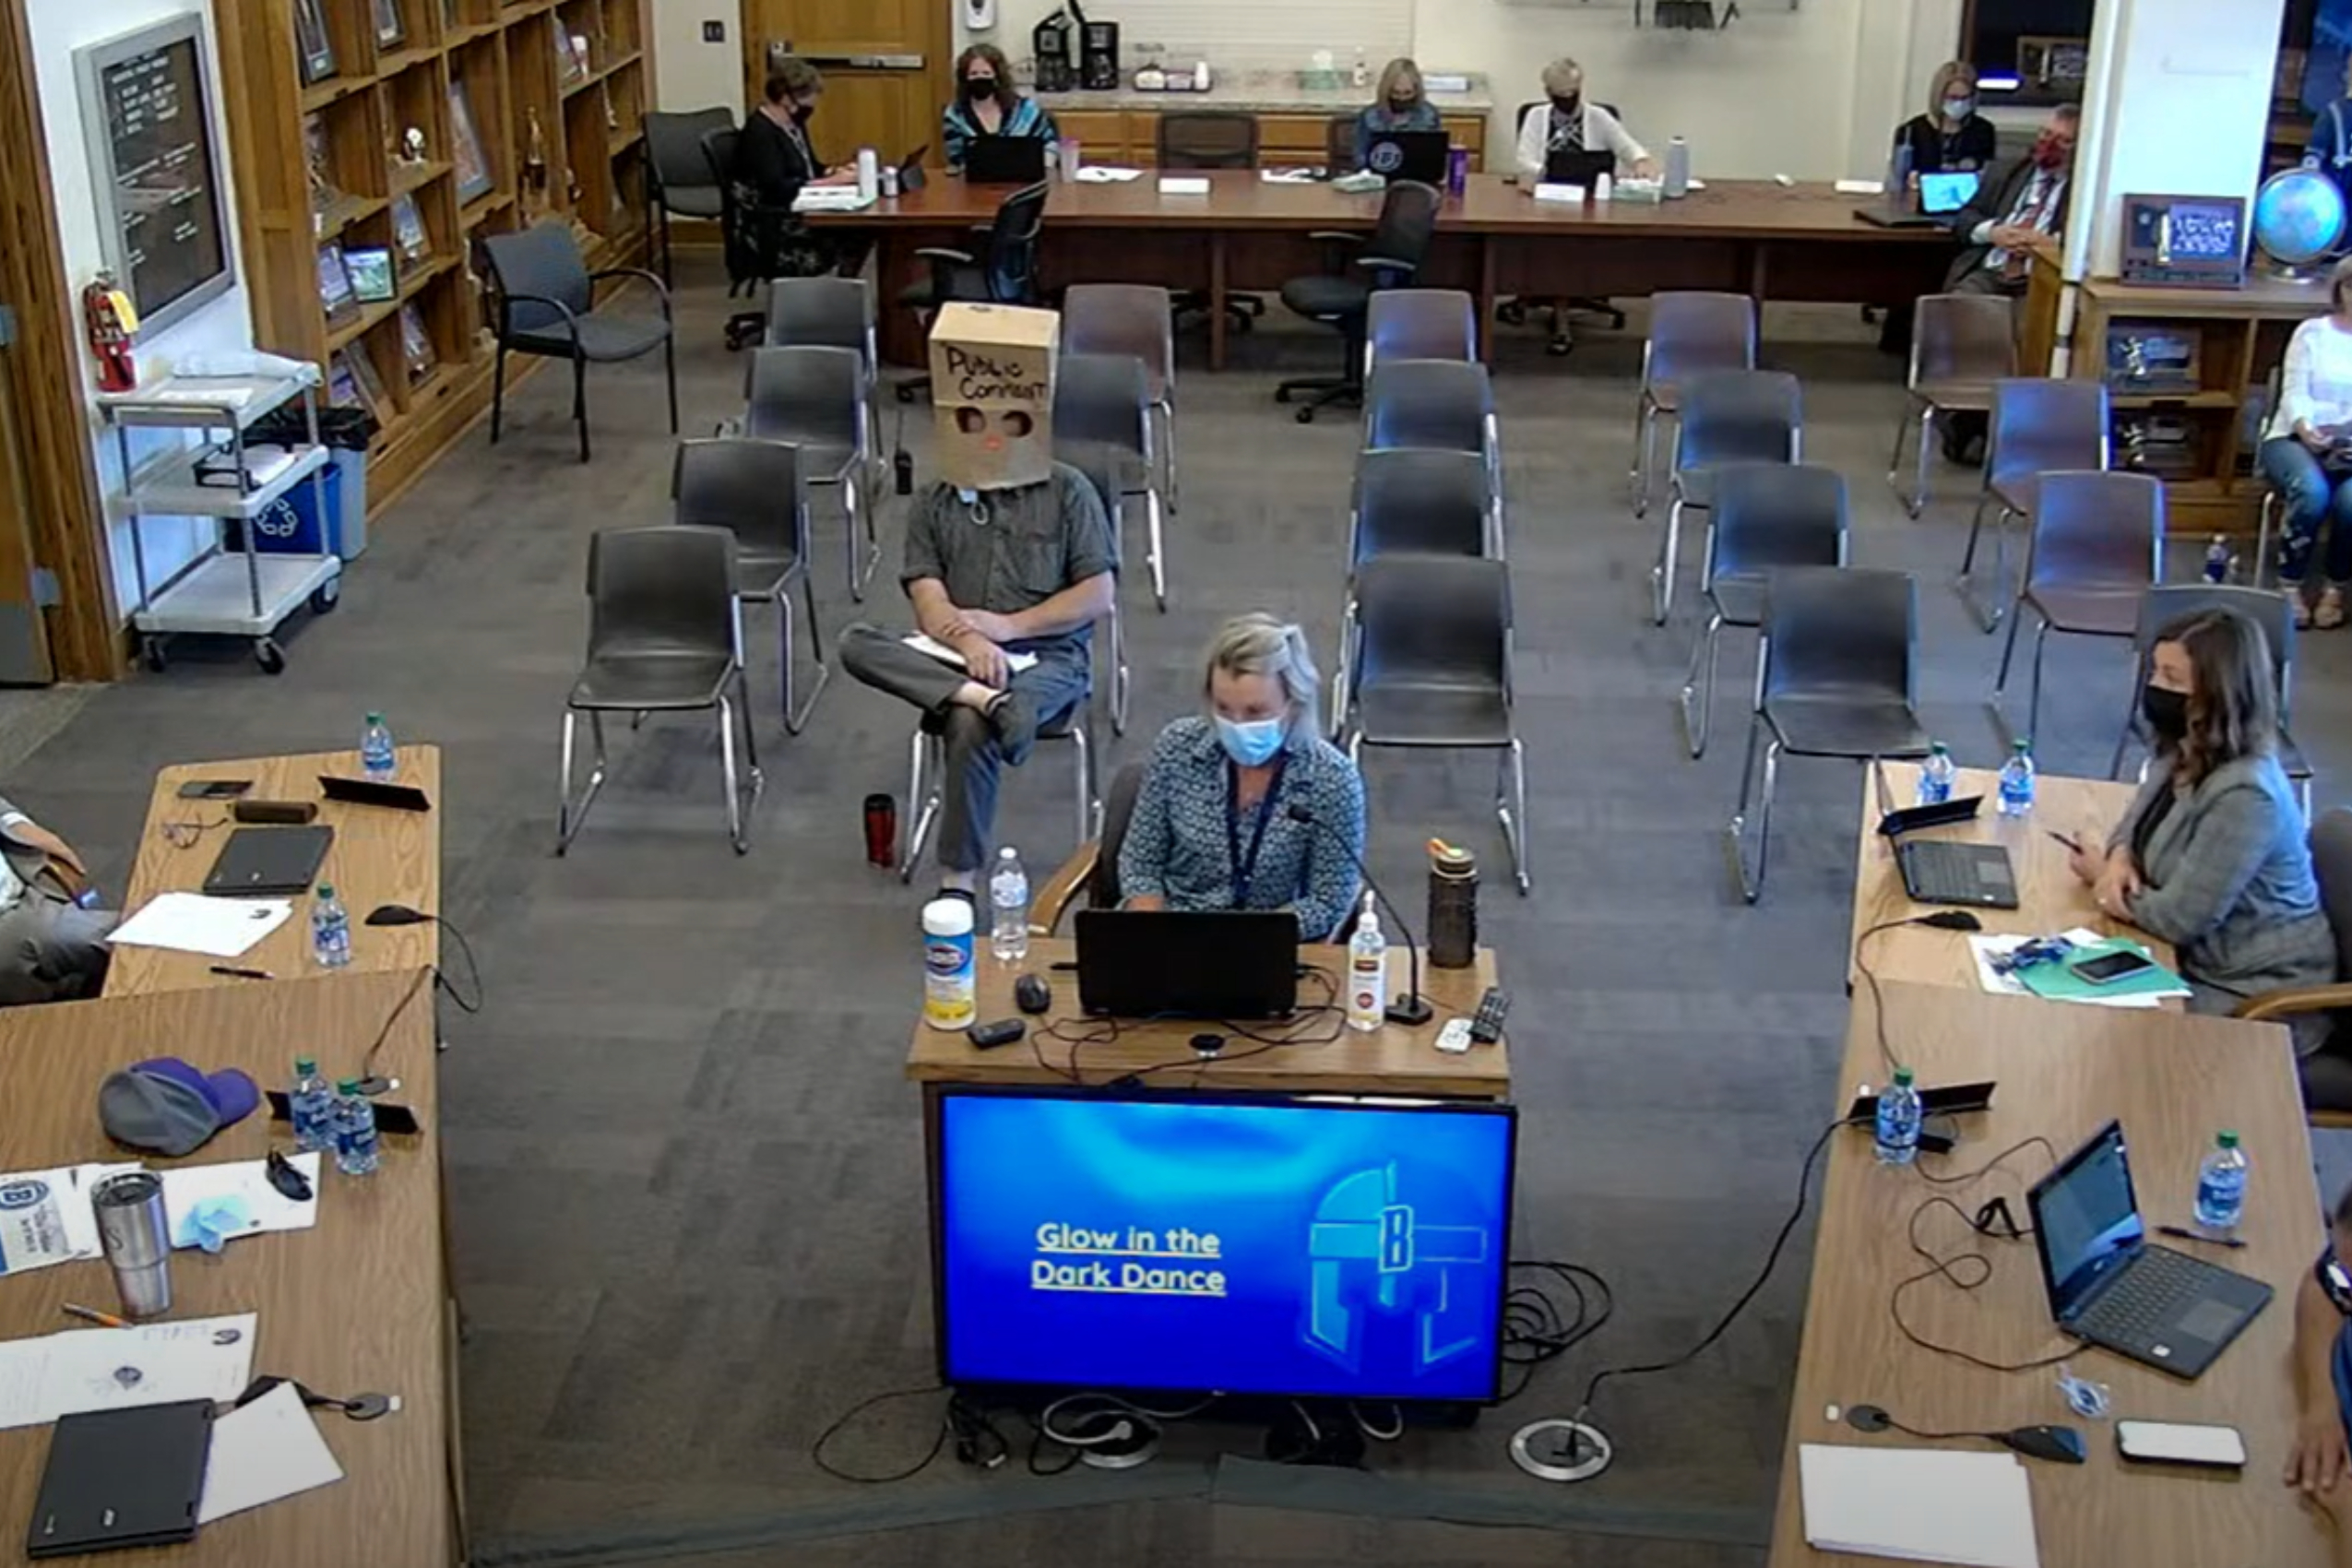 Principal Andrea Rusk speaks to her school board as a man wearing a grocery bag over his head looks on from the audience. (YouTube/ Brainerd Public Schools)